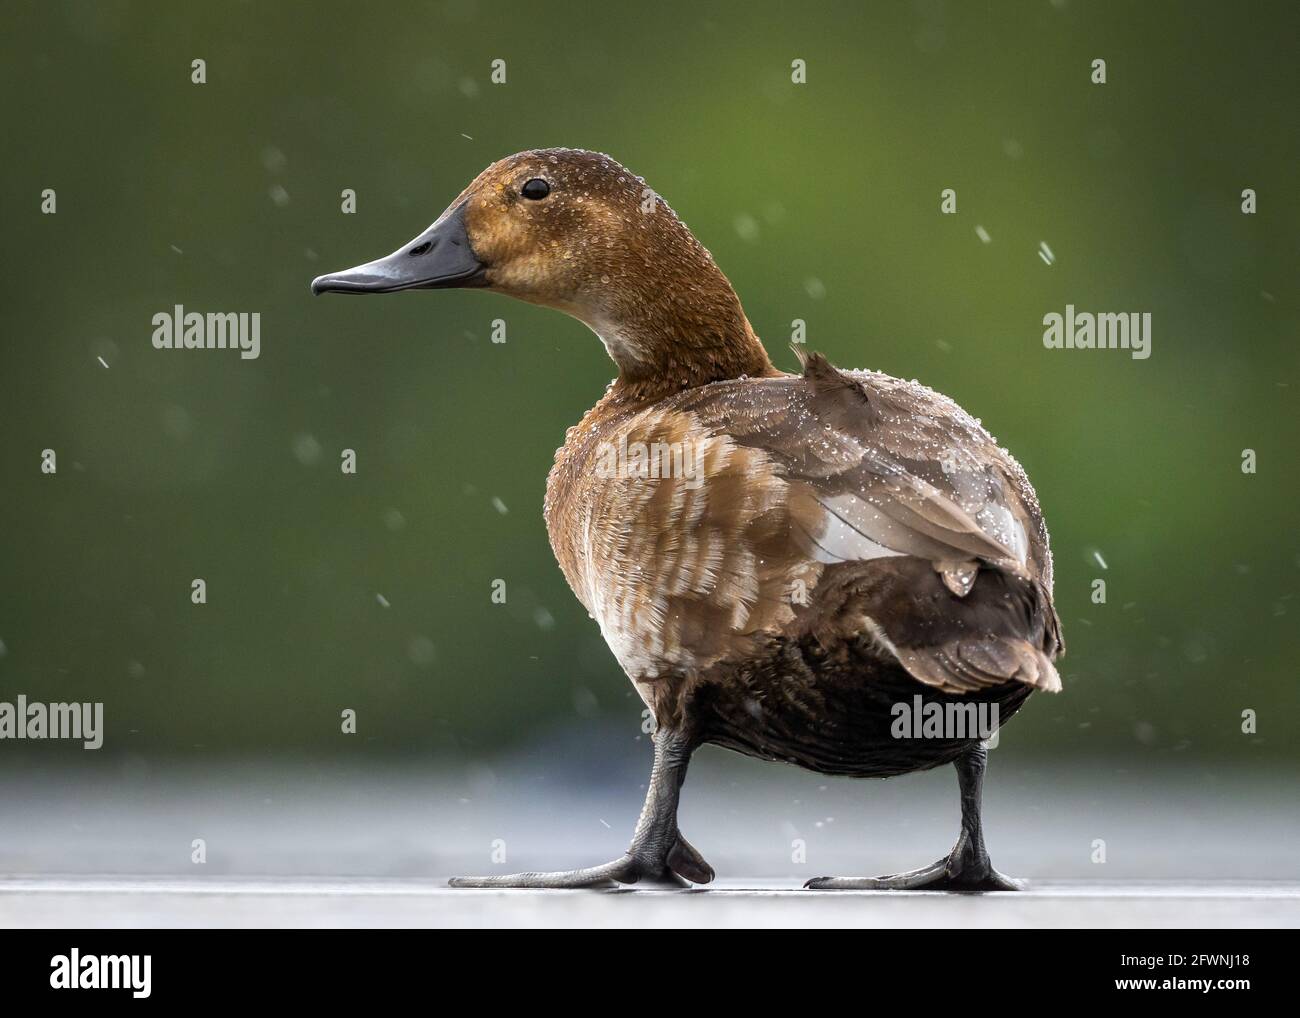 Brown Mallard duck stood in heavy rain with water off a ducks back.  Looking behind isolated from out of focus background in wild nature reserve. Stock Photo